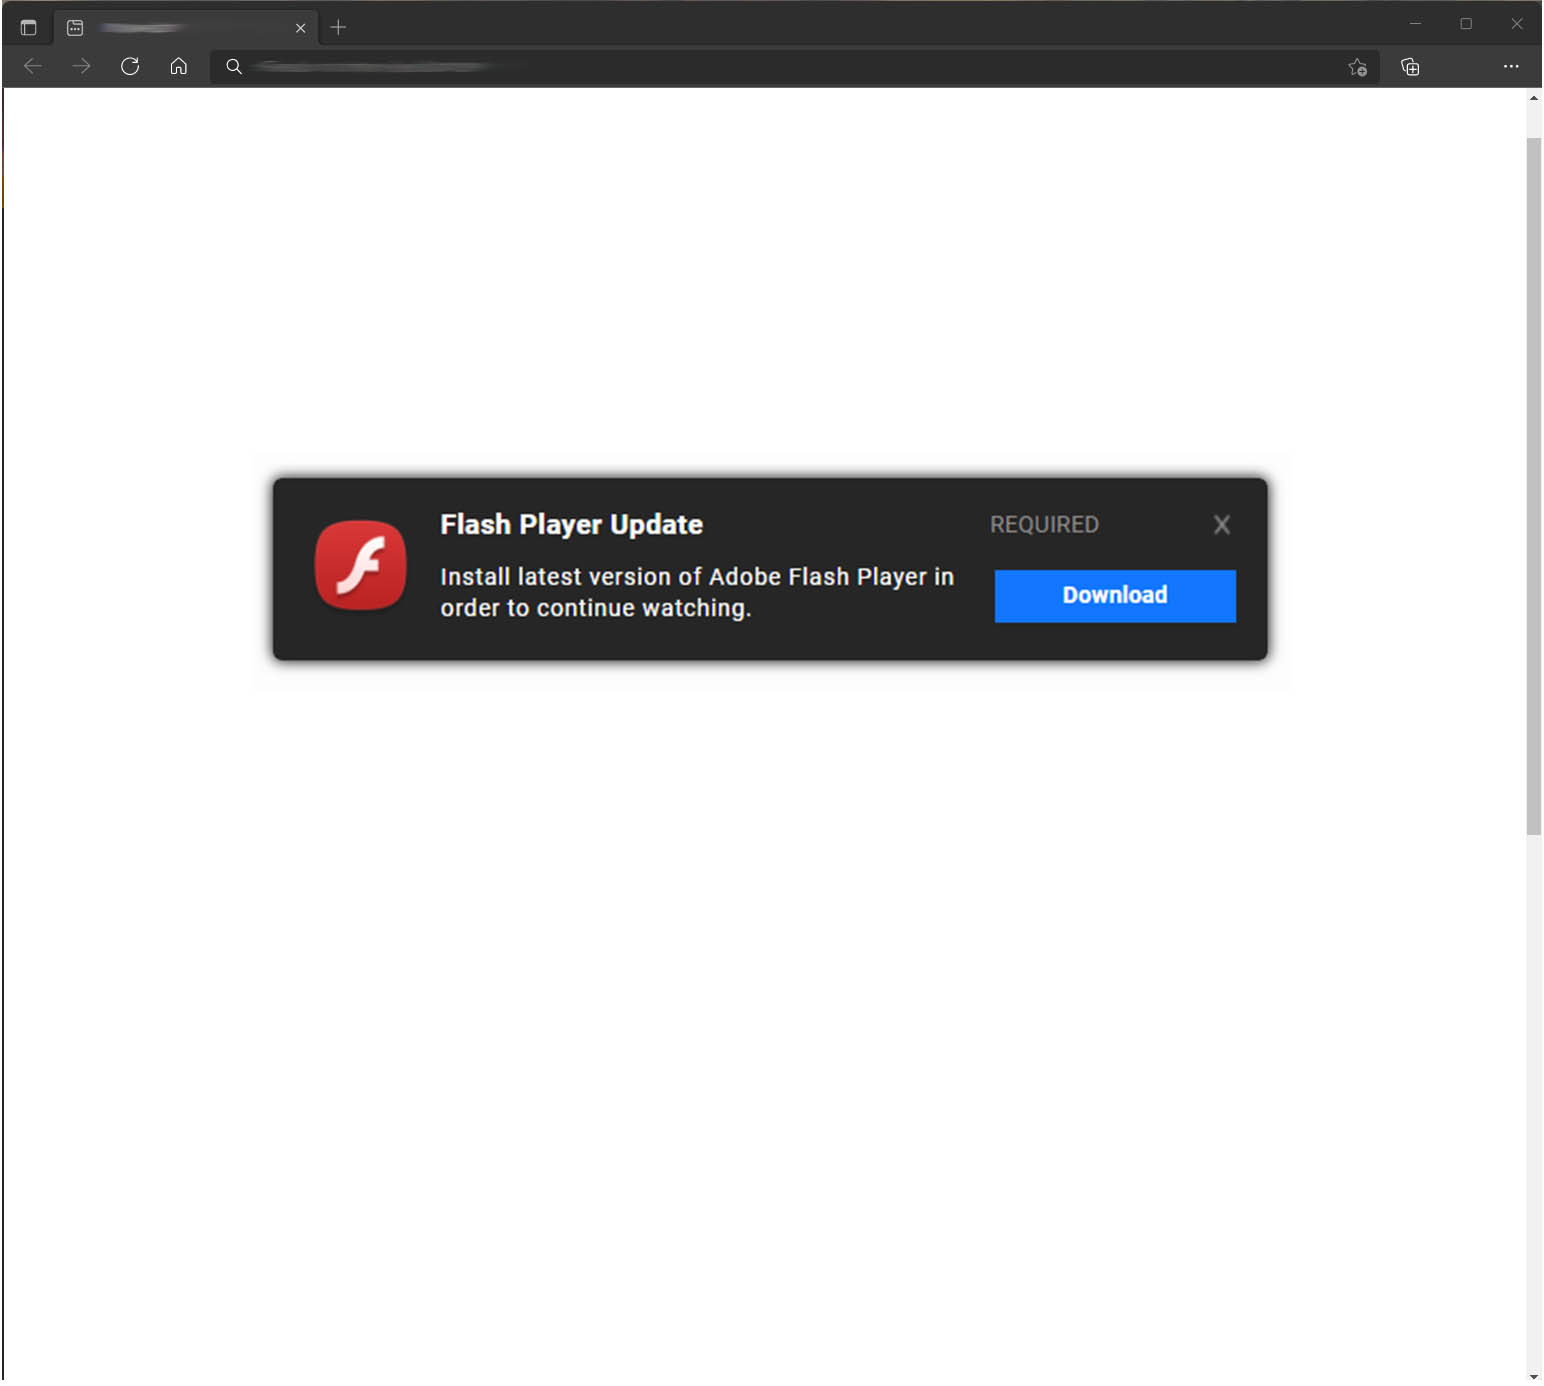 fake flash player update download now